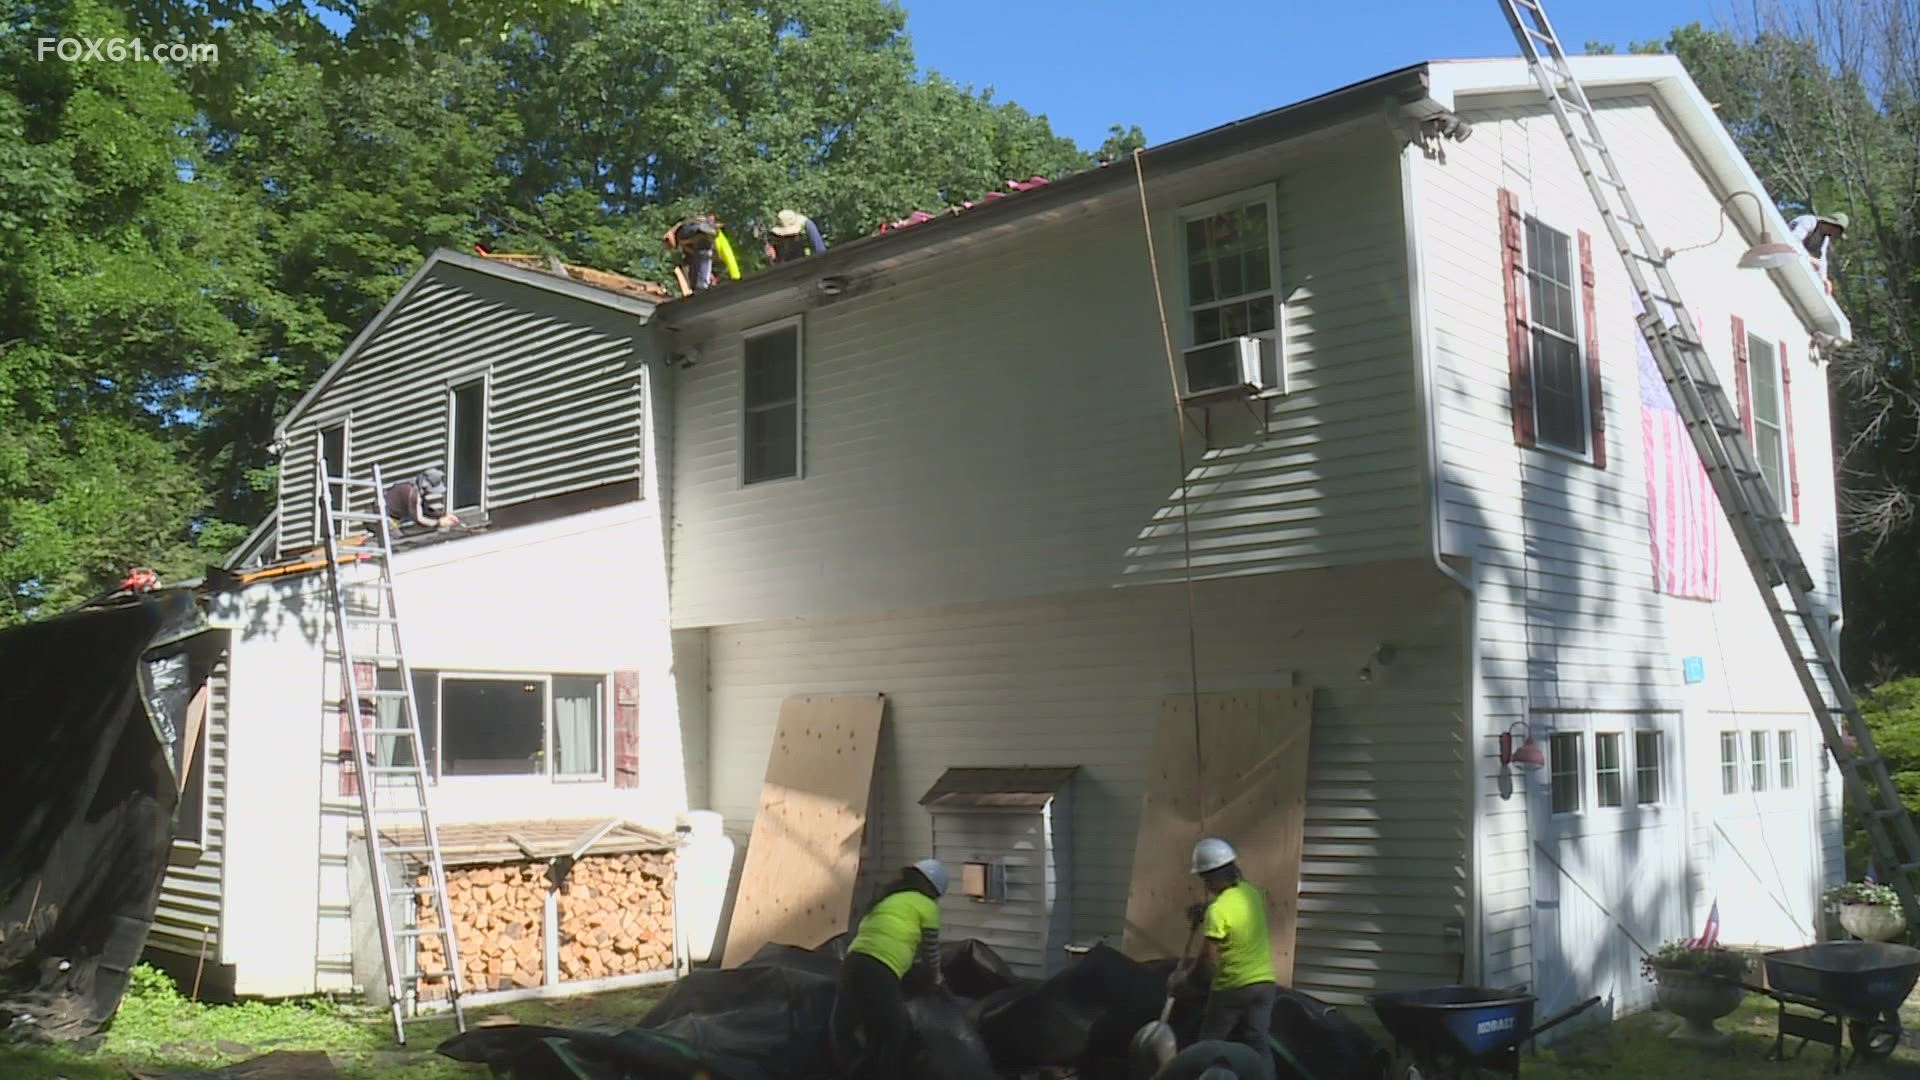 Community members stepped up to give the Marine Corp veteran a new roof.